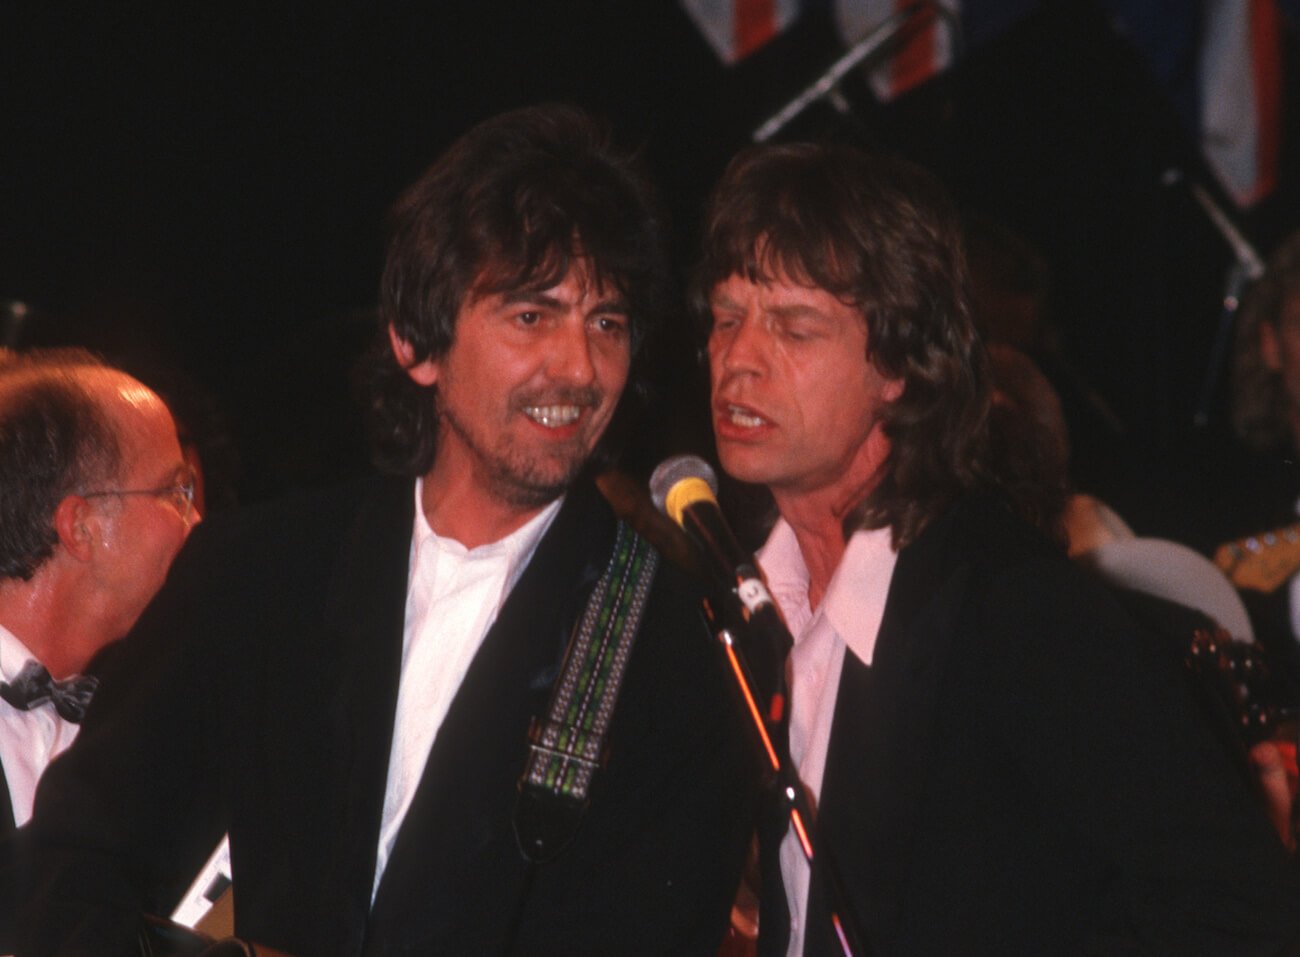 George Harrison of The Beatles and Mick Jagger of The Rolling Stones performing at the 1988 Rock & Roll Hall of Fame induction ceremony.